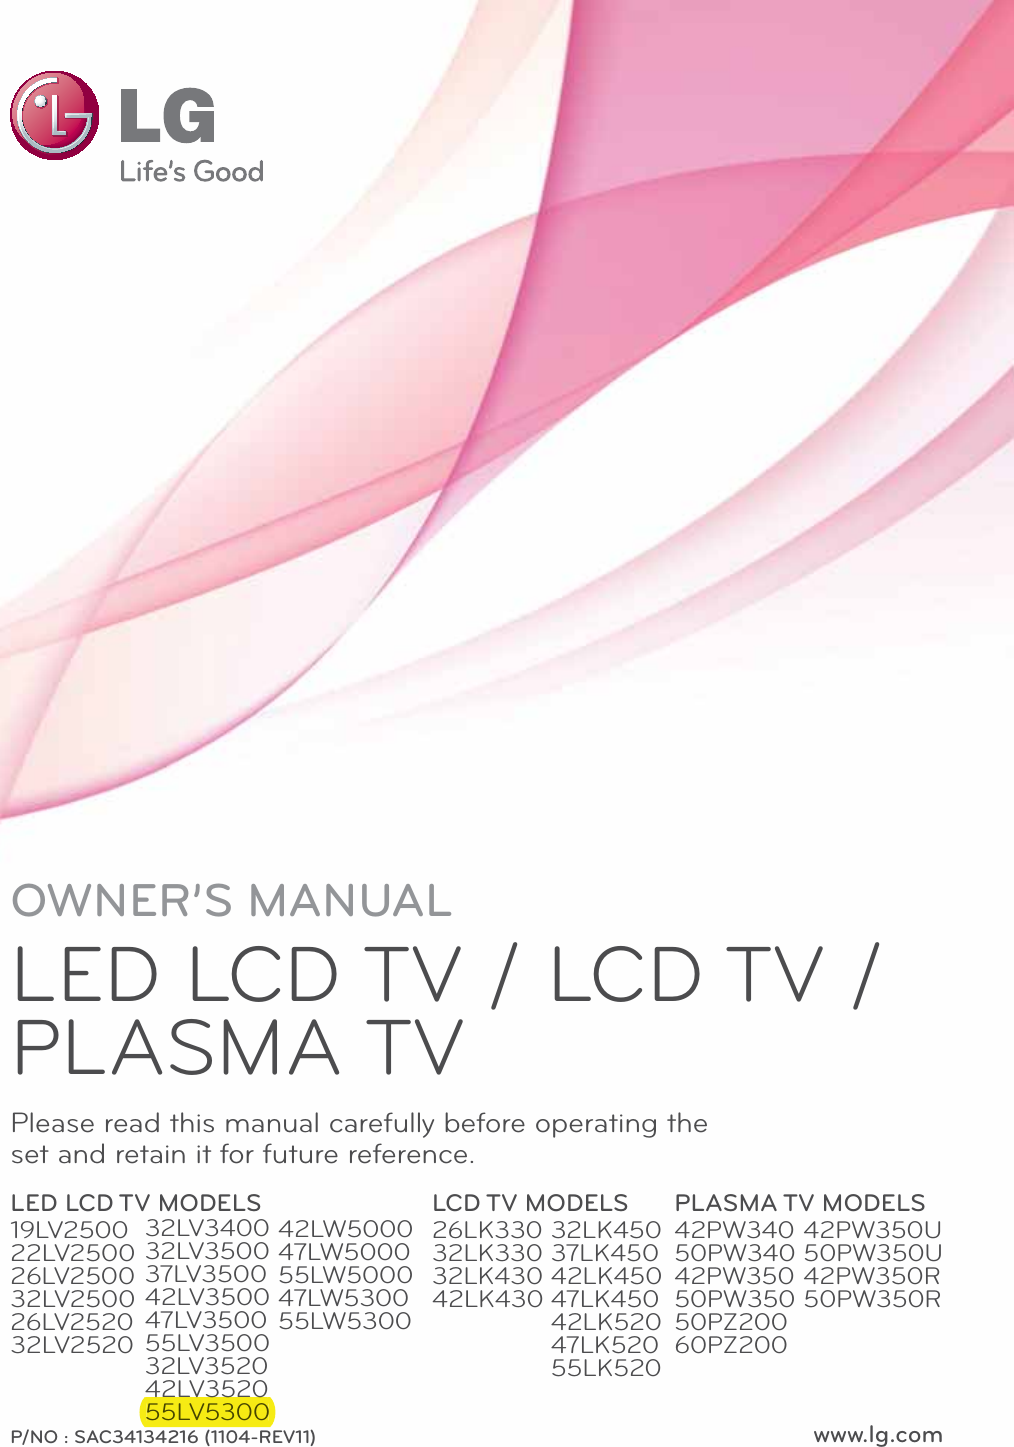 www.lg.comP/NO : SAC34134216 (1104-REV11)OWNER’S MANUALLED LCD TV / LCD TV / PLASMA TVPlease read this manual carefully before operating the set and retain it for future reference.LED LCD TV MODELS19LV250022LV250026LV250032LV250026LV252032LV2520LCD TV MODELS26LK33032LK33032LK43042LK430PLASMA TV MODELS42PW34050PW34042PW35050PW35050PZ20060PZ20032LV340032LV350037LV350042LV350047LV350055LV350032LV352042LV352055LV530032LK45037LK45042LK45047LK45042LK52047LK52055LK52042PW350U50PW350U42PW350R50PW350R42LW500047LW500055LW500047LW530055LW530042LV352055LV5300